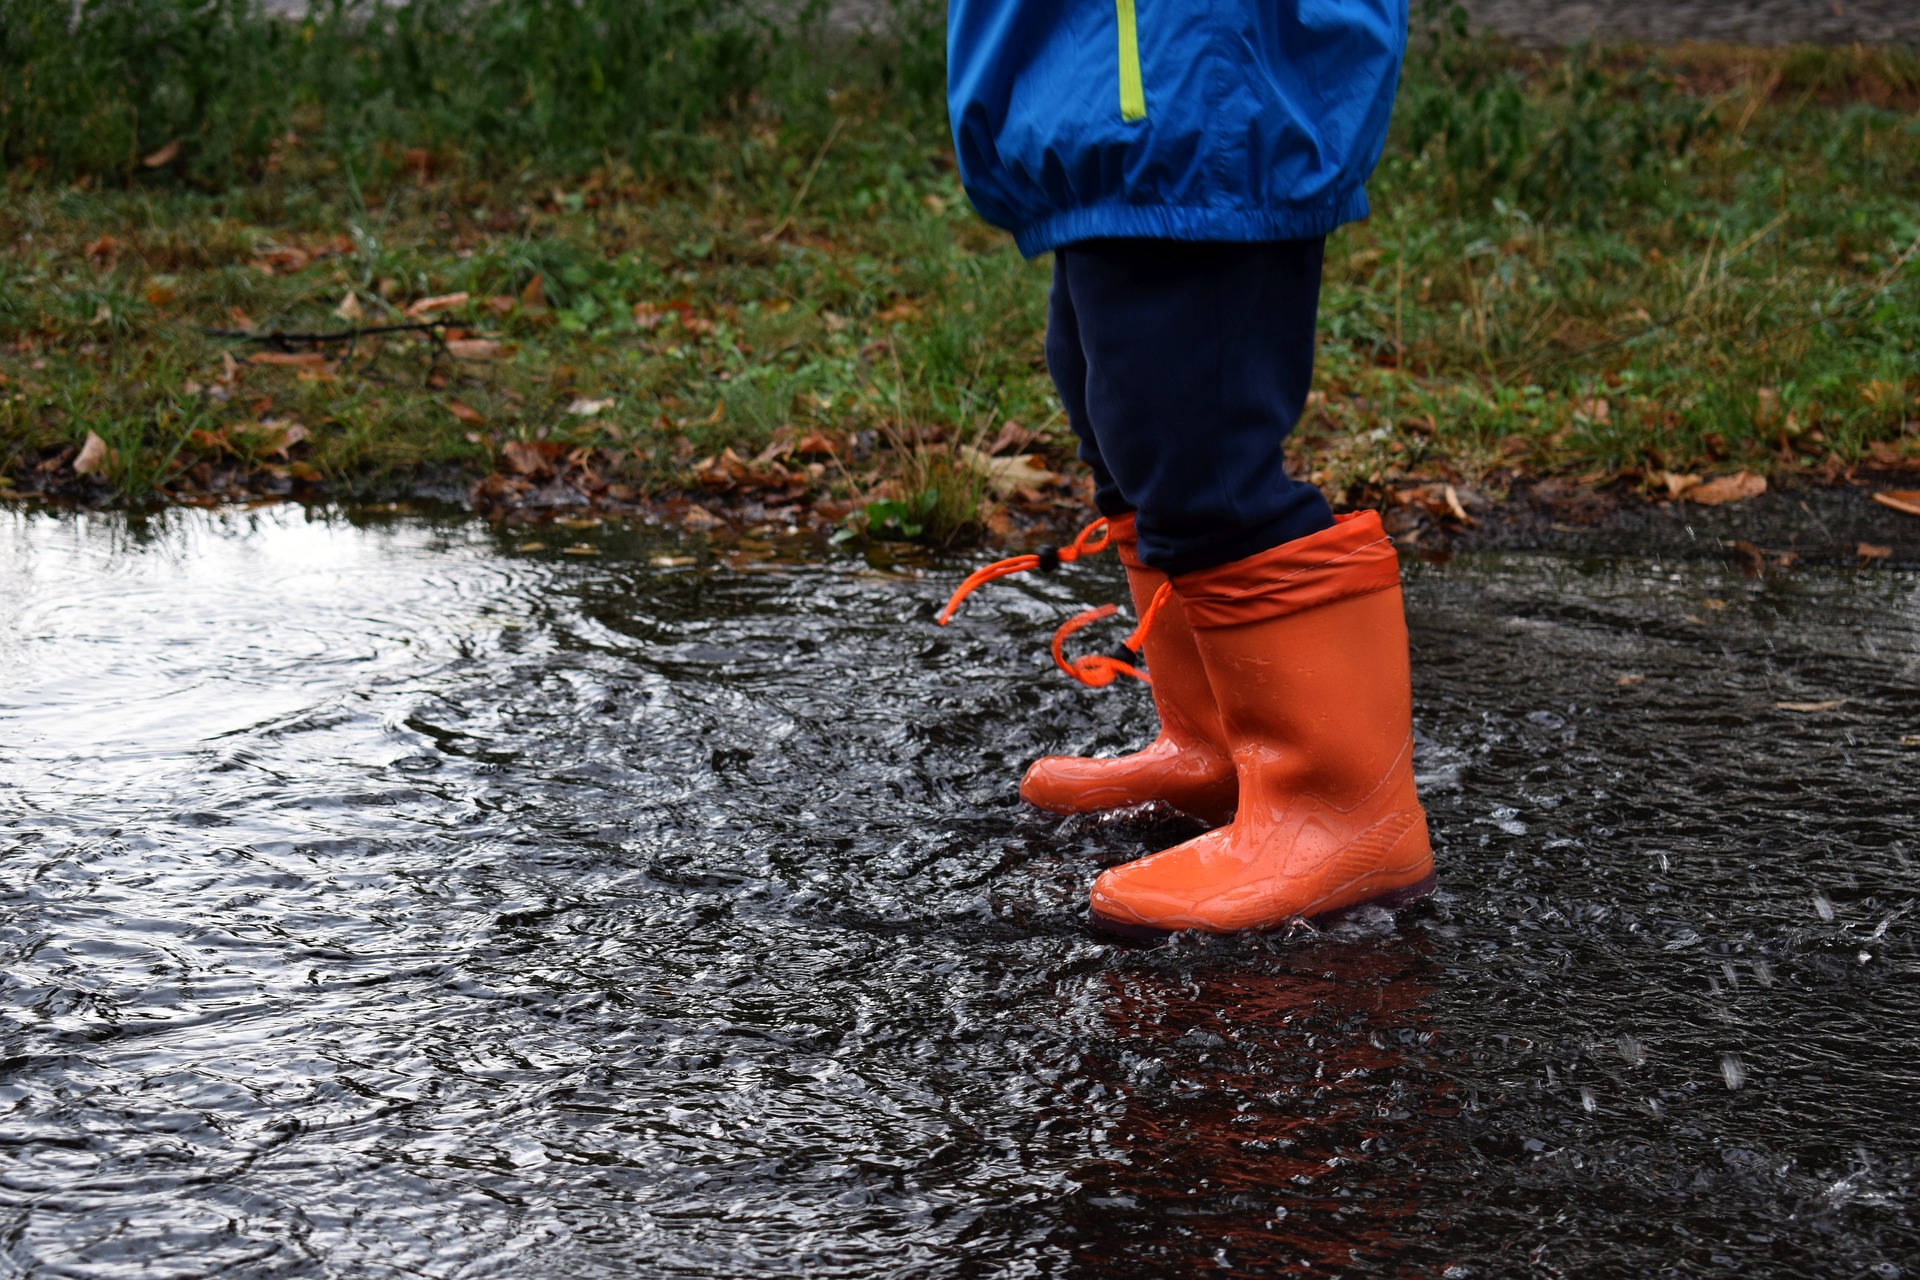 Photograph of stormwater running onto asphalt on a rainy day, with a child standing in rain gear